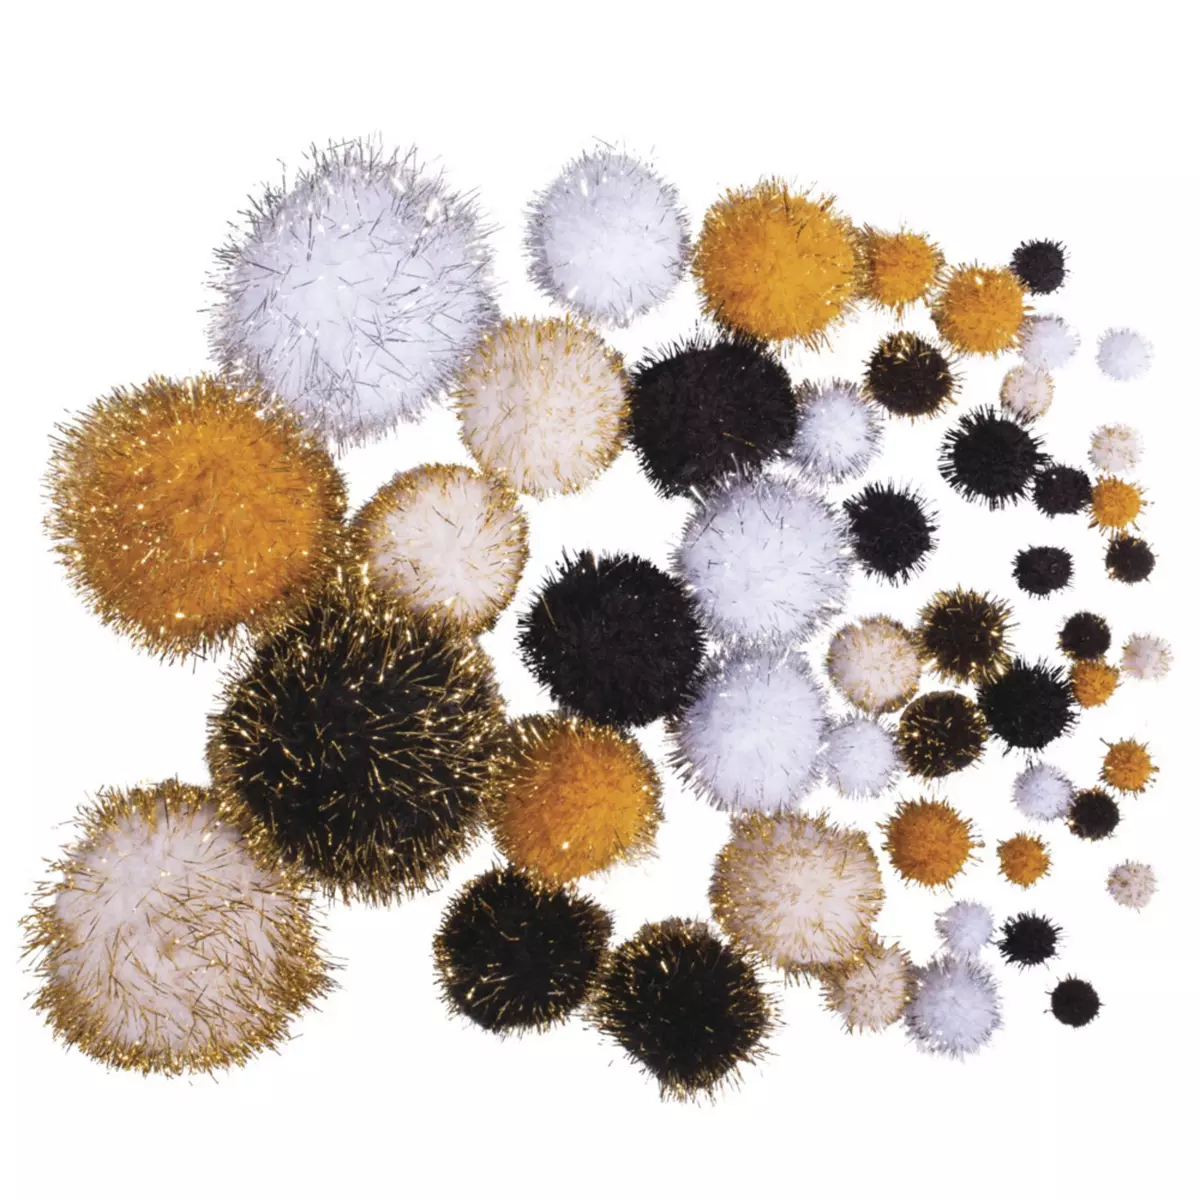 Rayher Pompons metallic, assortis, noir - or, coul.+tailles assorties, 50 pces